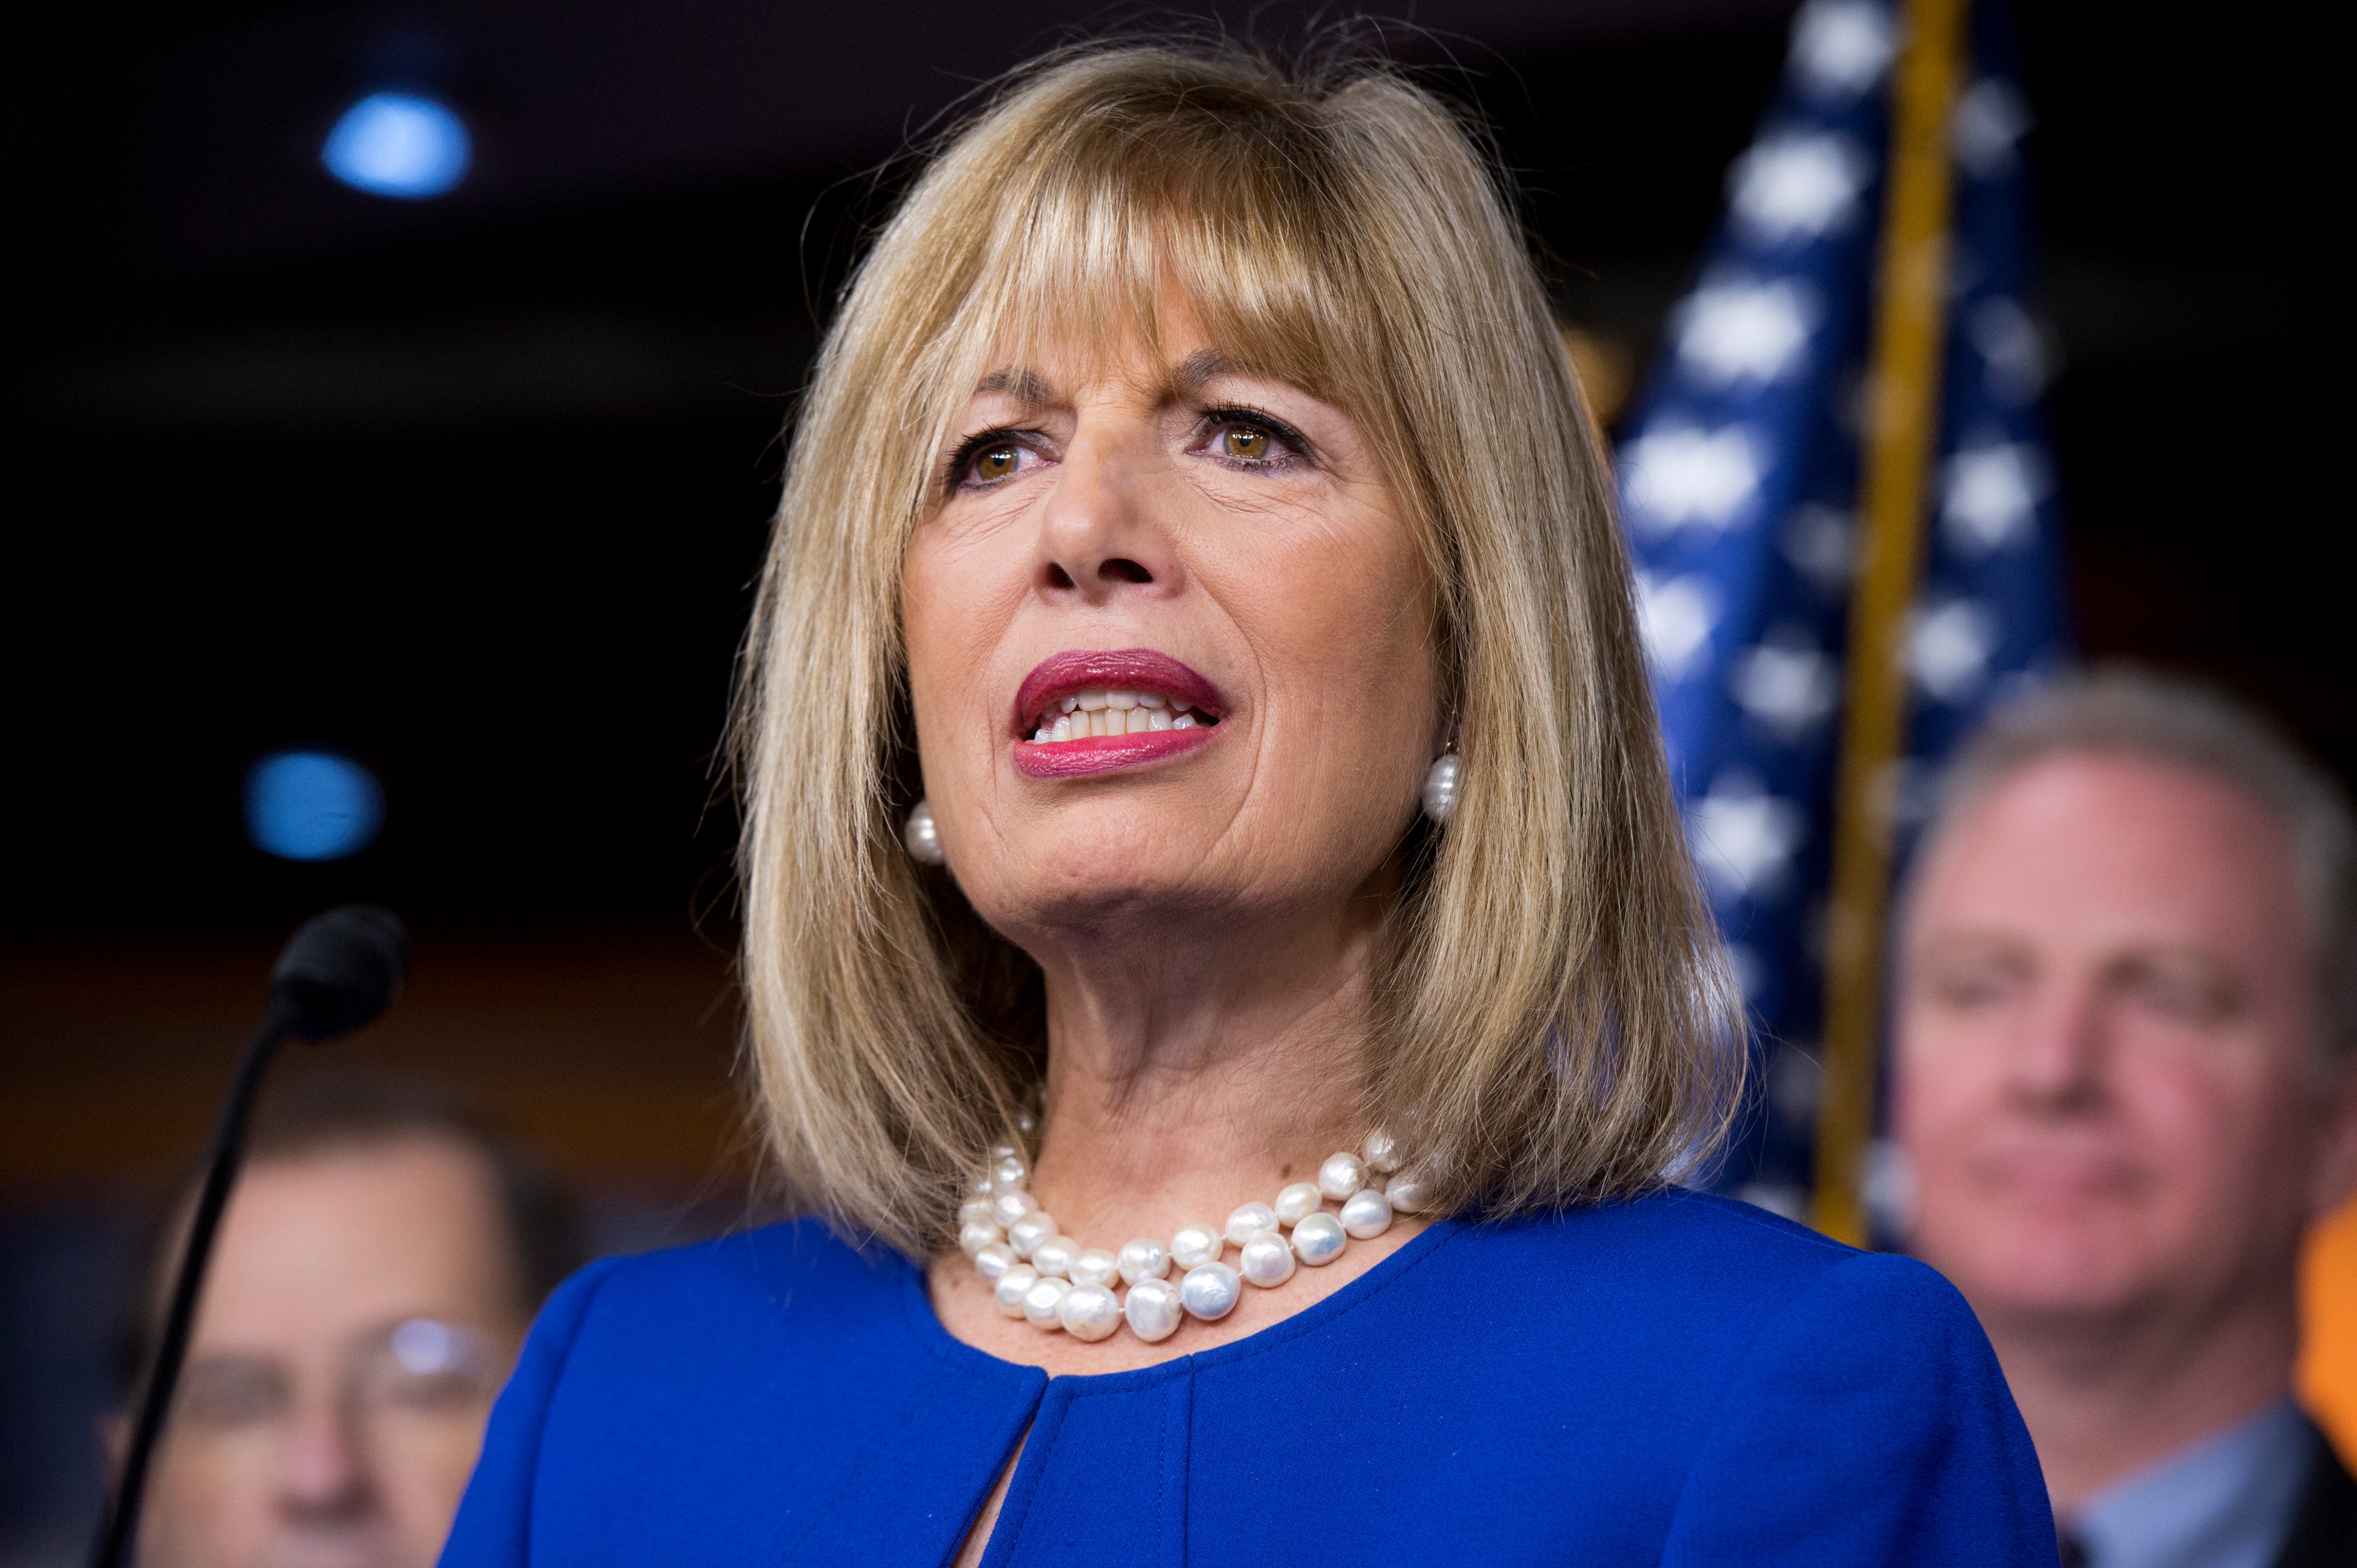 California Representative Jackie Speier attends a news conference at the U.S. Capitol Visitor Center in Washington, D.C., on Jan. 6, 2016 (Tom Williams—AP)